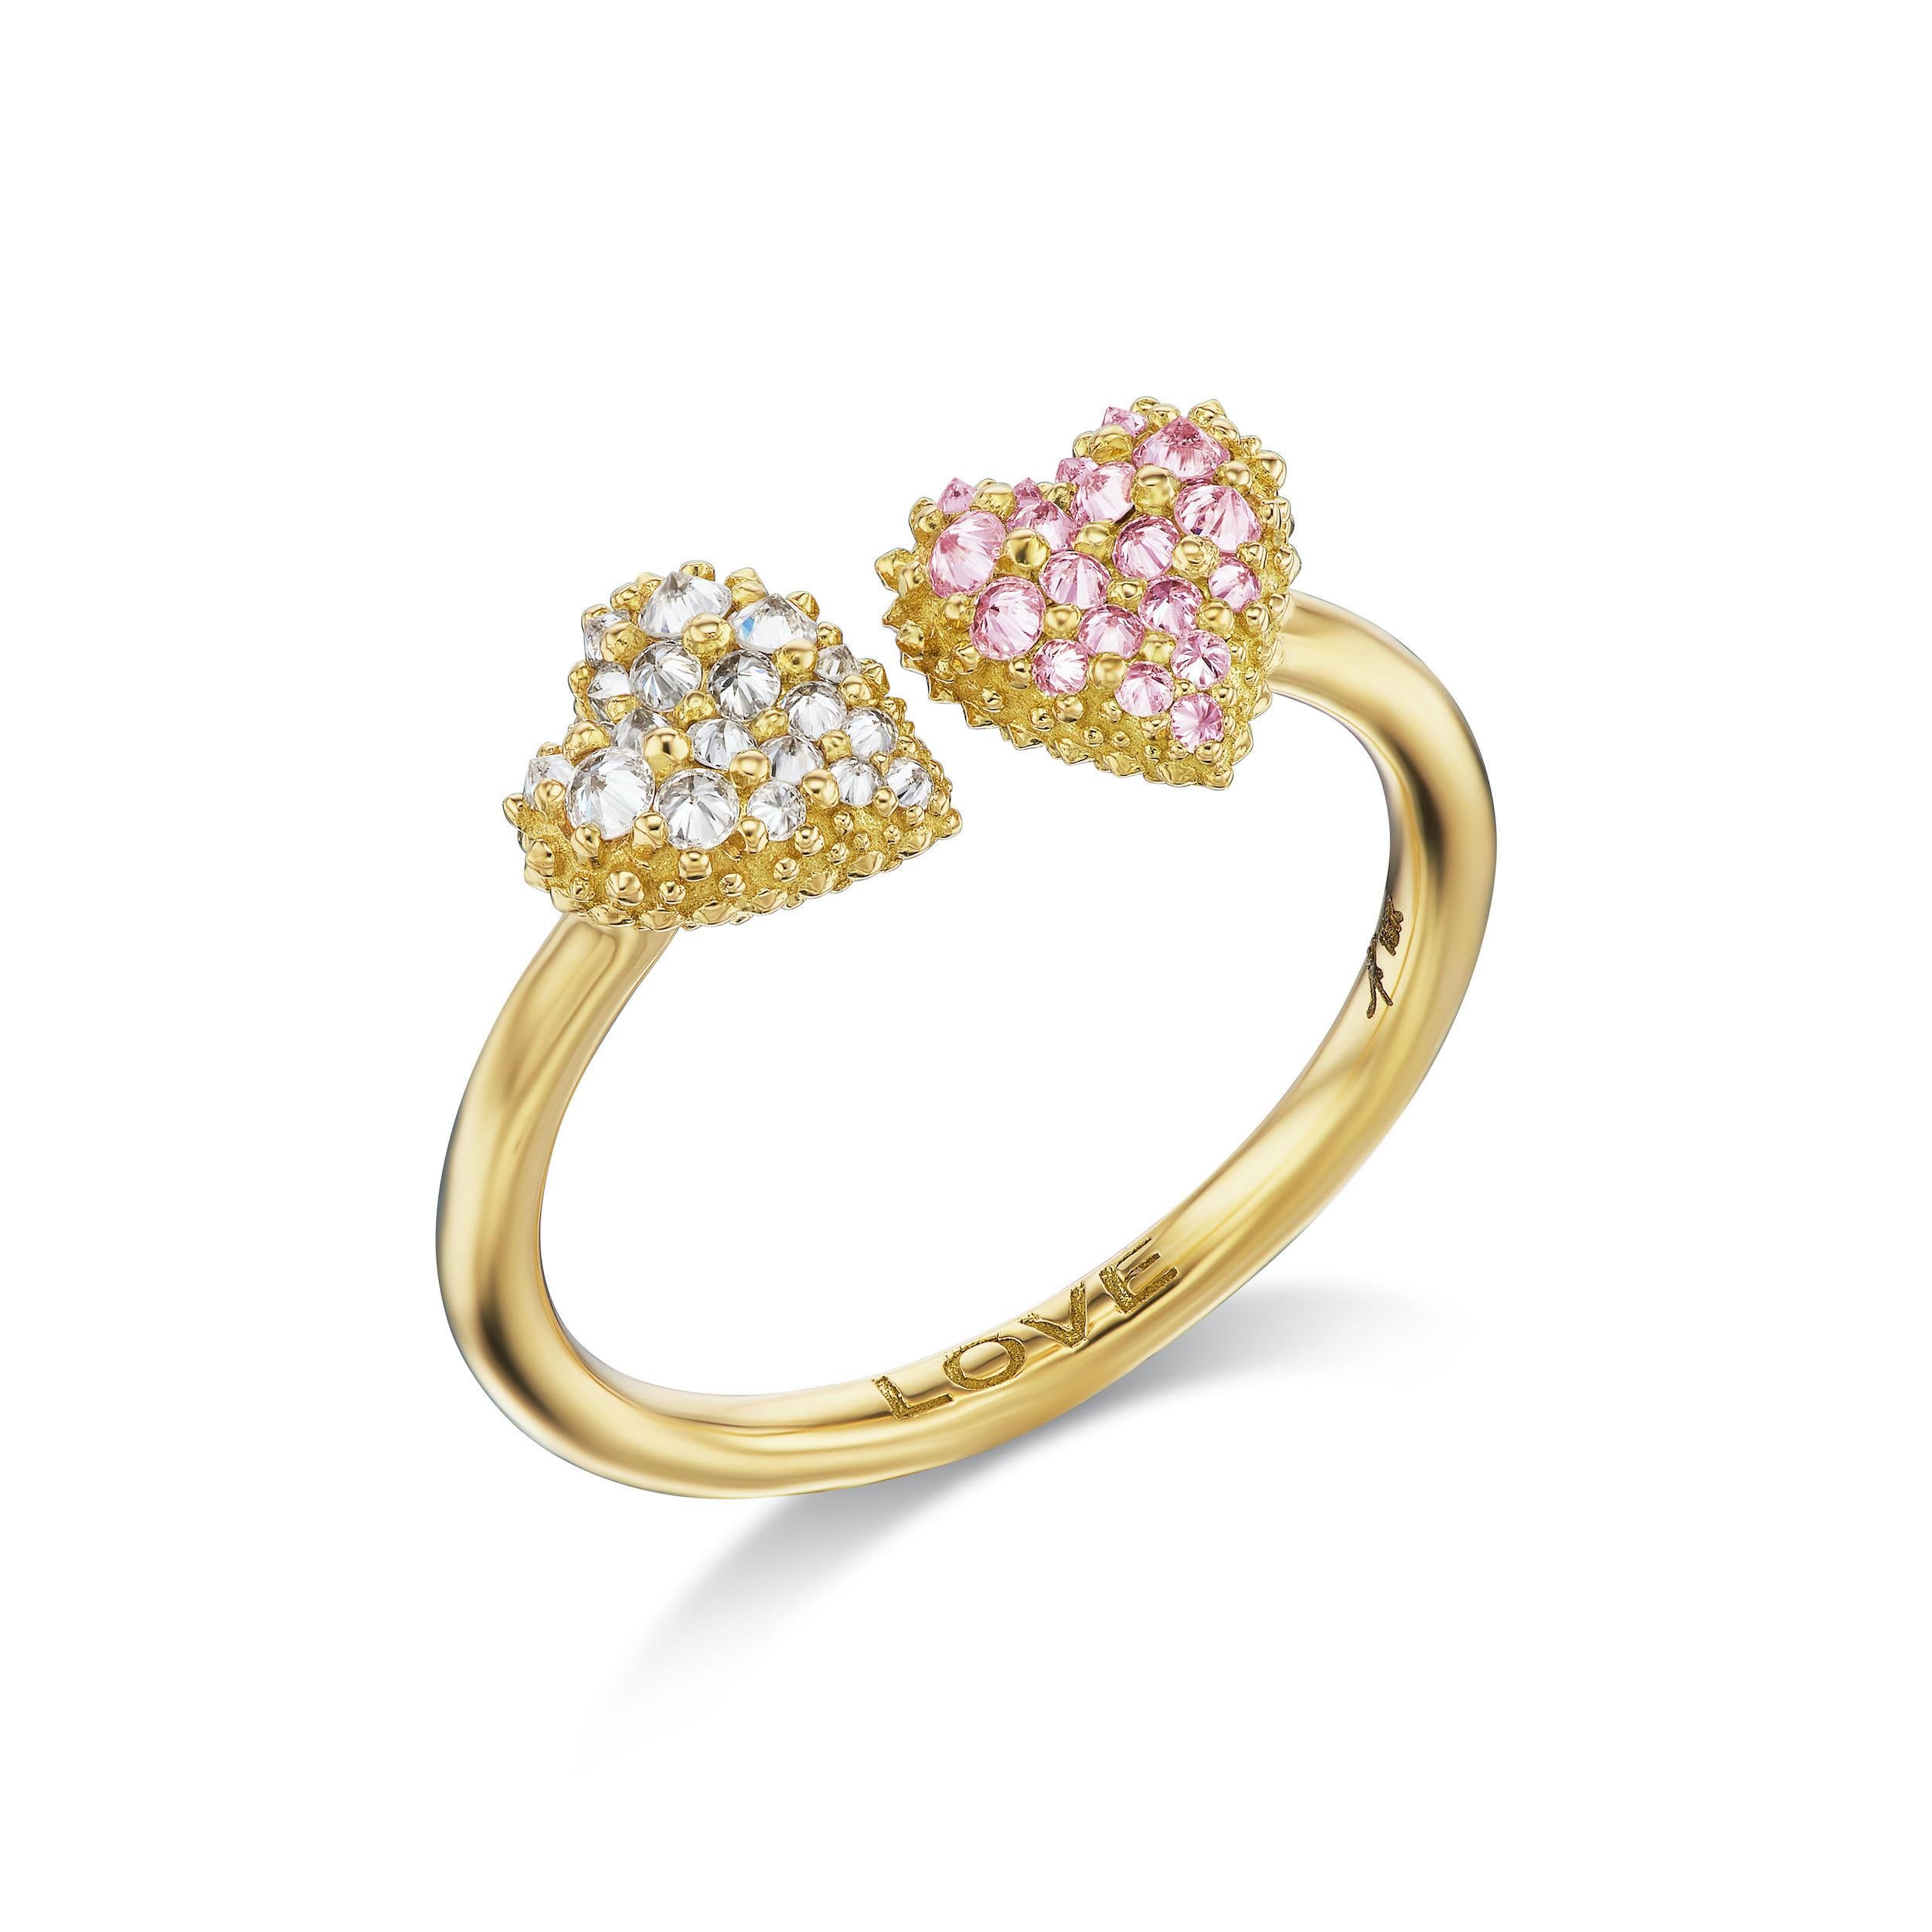 For Sale:  AnaKatarina Diamond, Pink Sapphire, and 18k Yellow Gold 'Moi et Toi' Ring 3